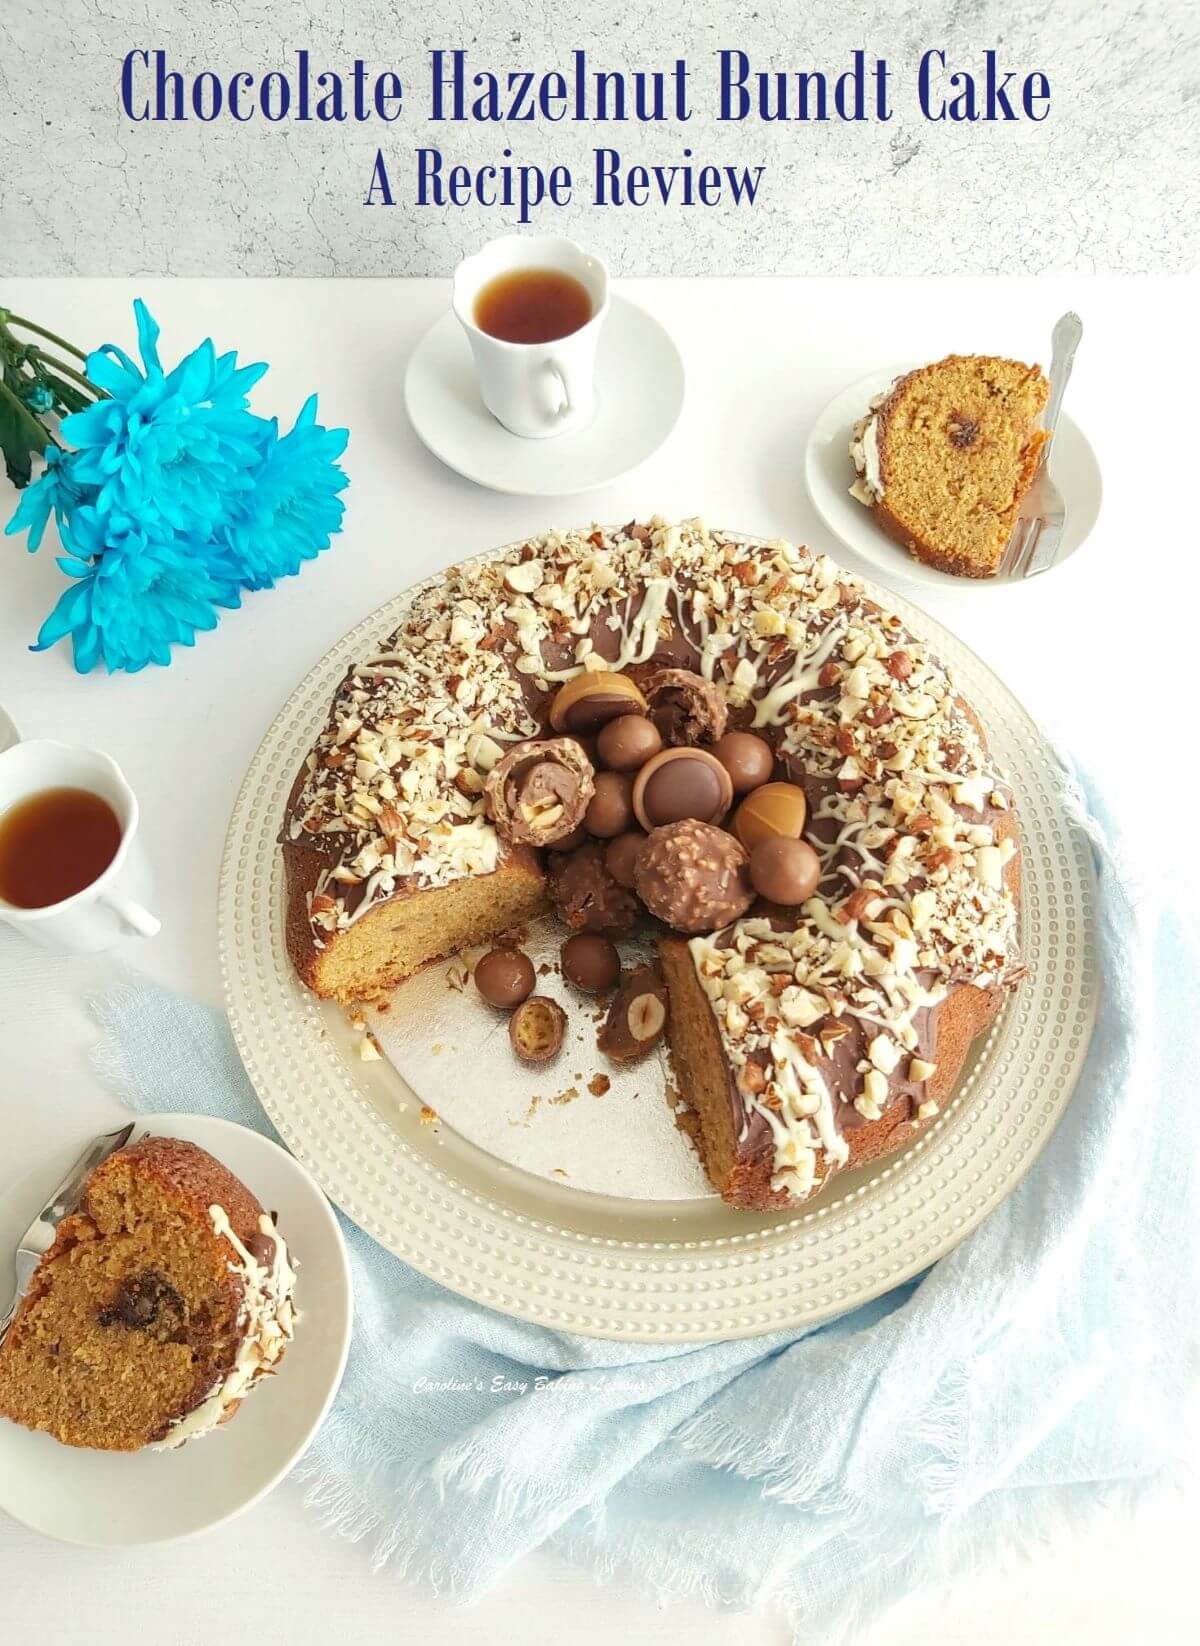 Overhead shot of table with chocolate hazelnut topped bundt cake served with coffee and title recipe review.